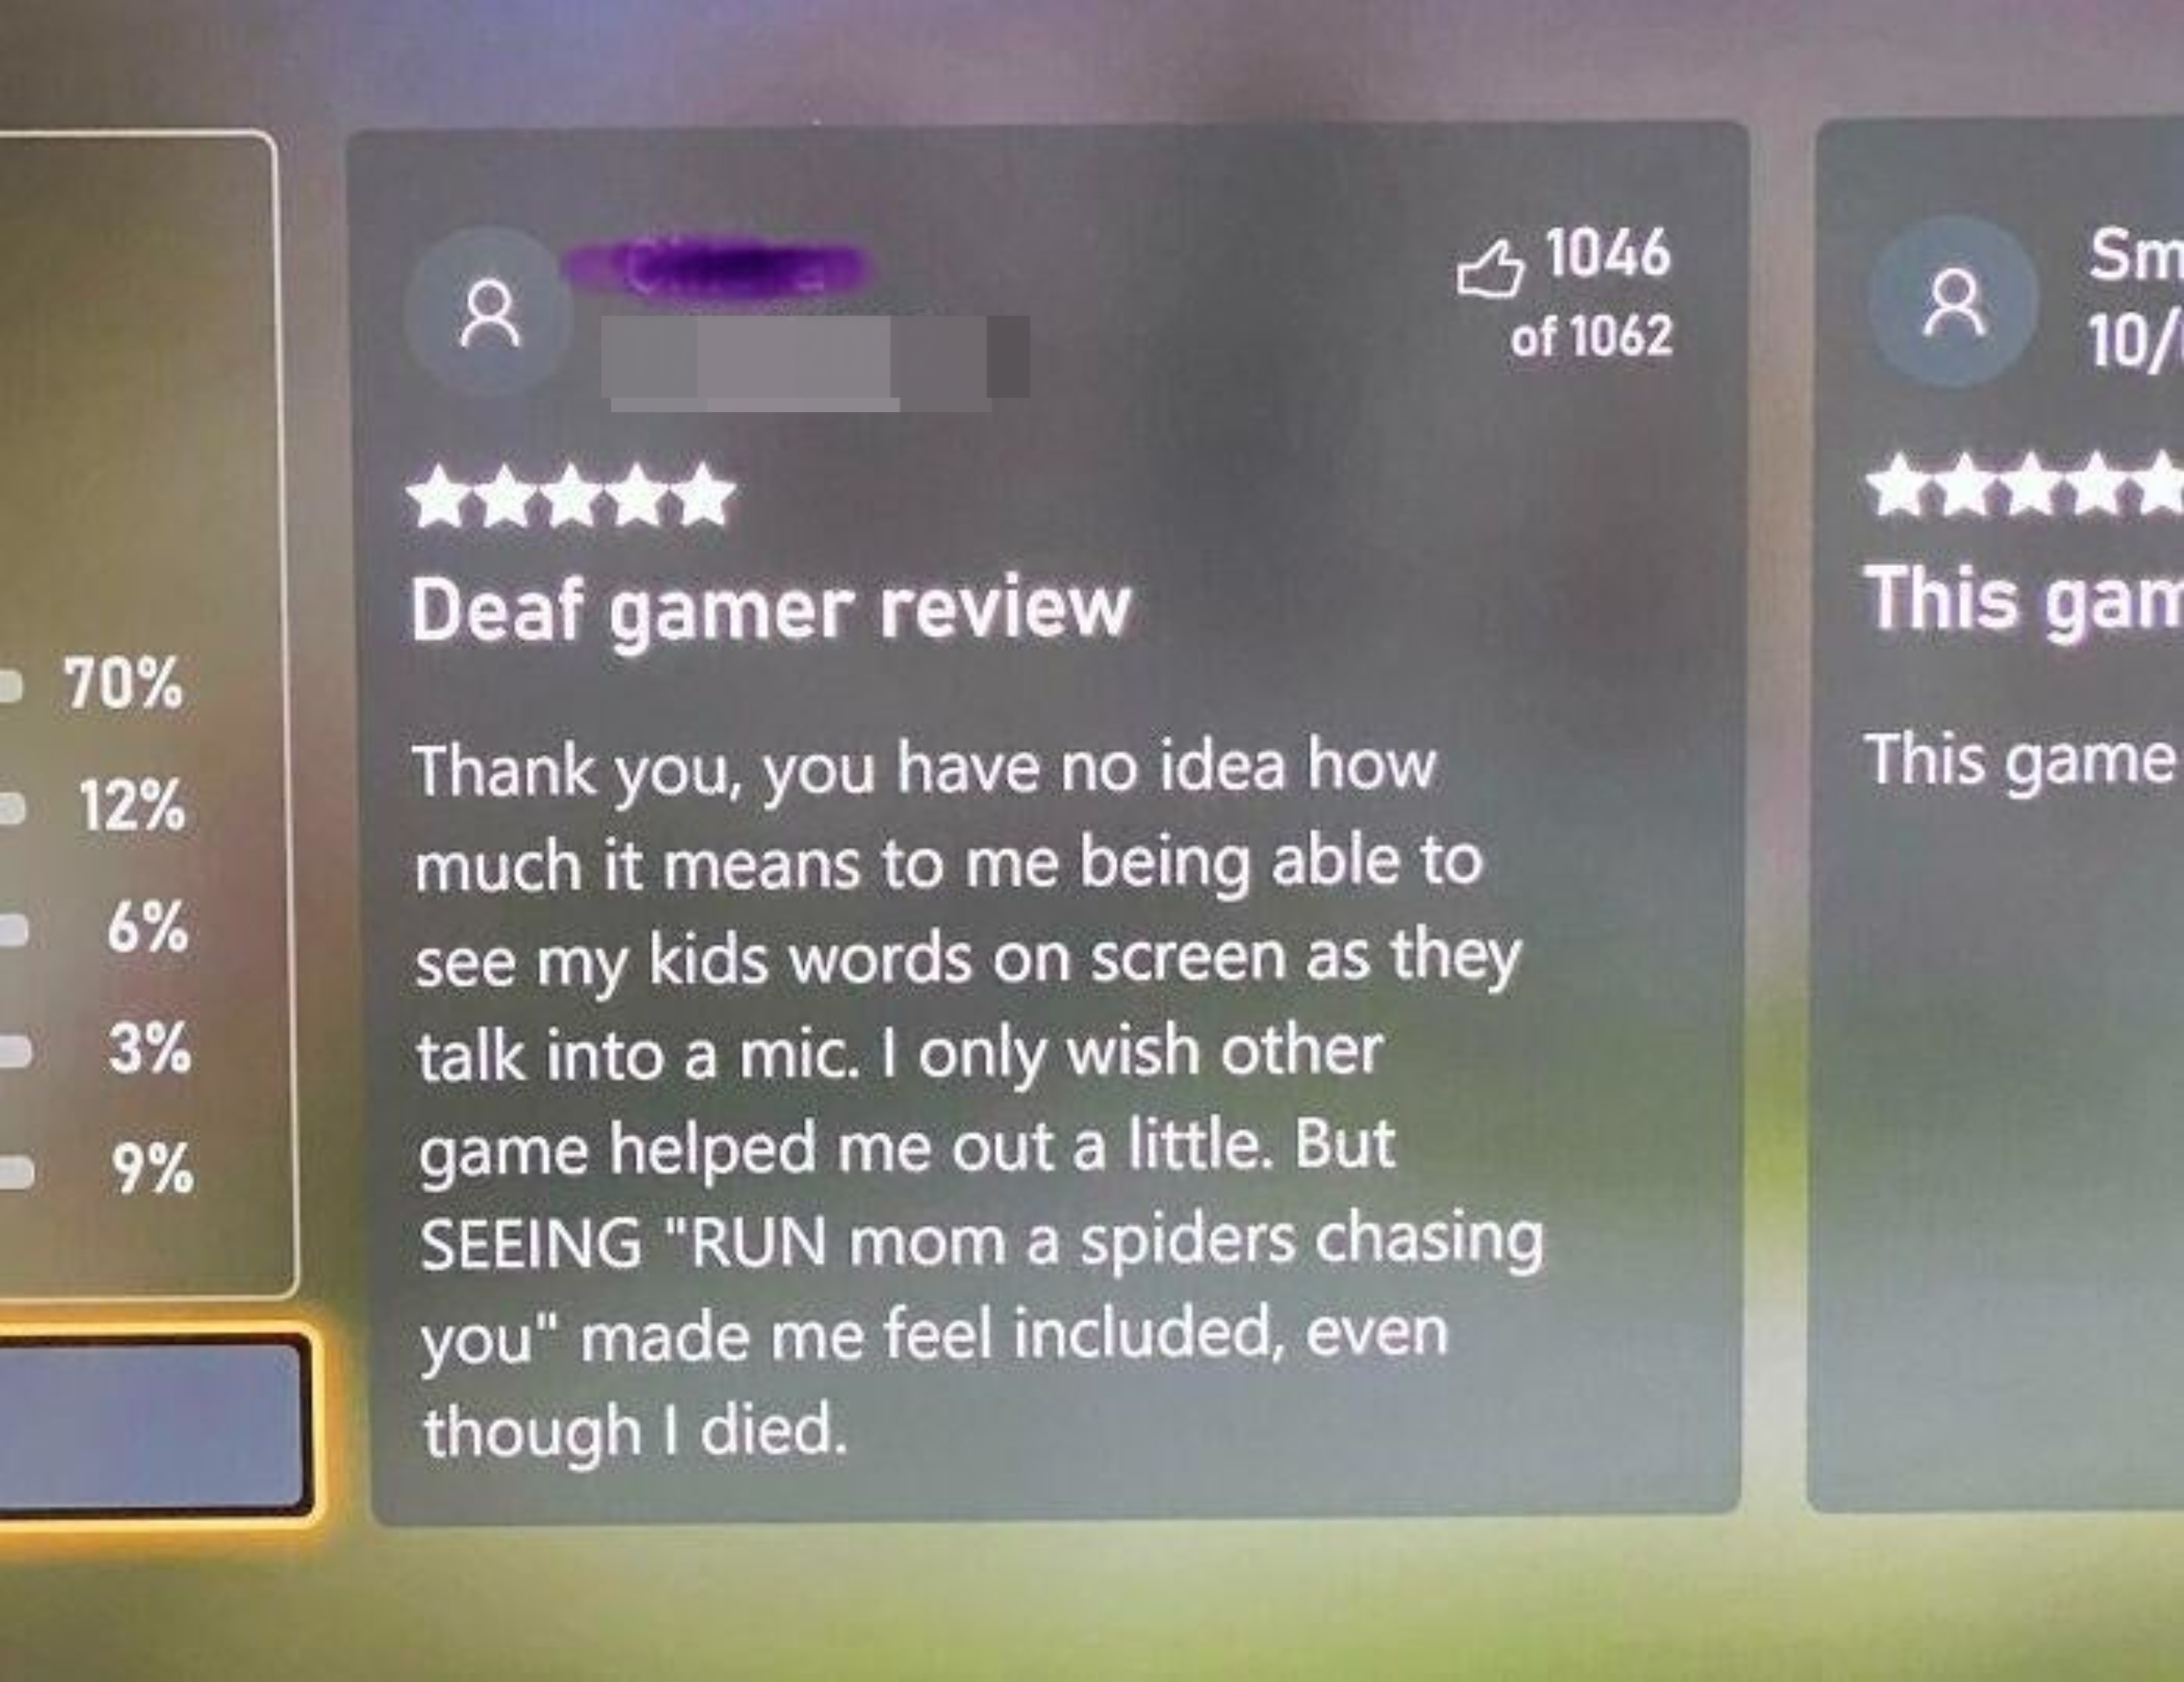 A 5-star &quot;Deaf gamer review&quot;: &quot;Thank you, you have no idea how much it means to be able to see my kids&#x27; words onscreen as they talk into a mic; seeing &#x27;Run Mom a spiders chasing you&#x27; made me feel included even though I died&quot;